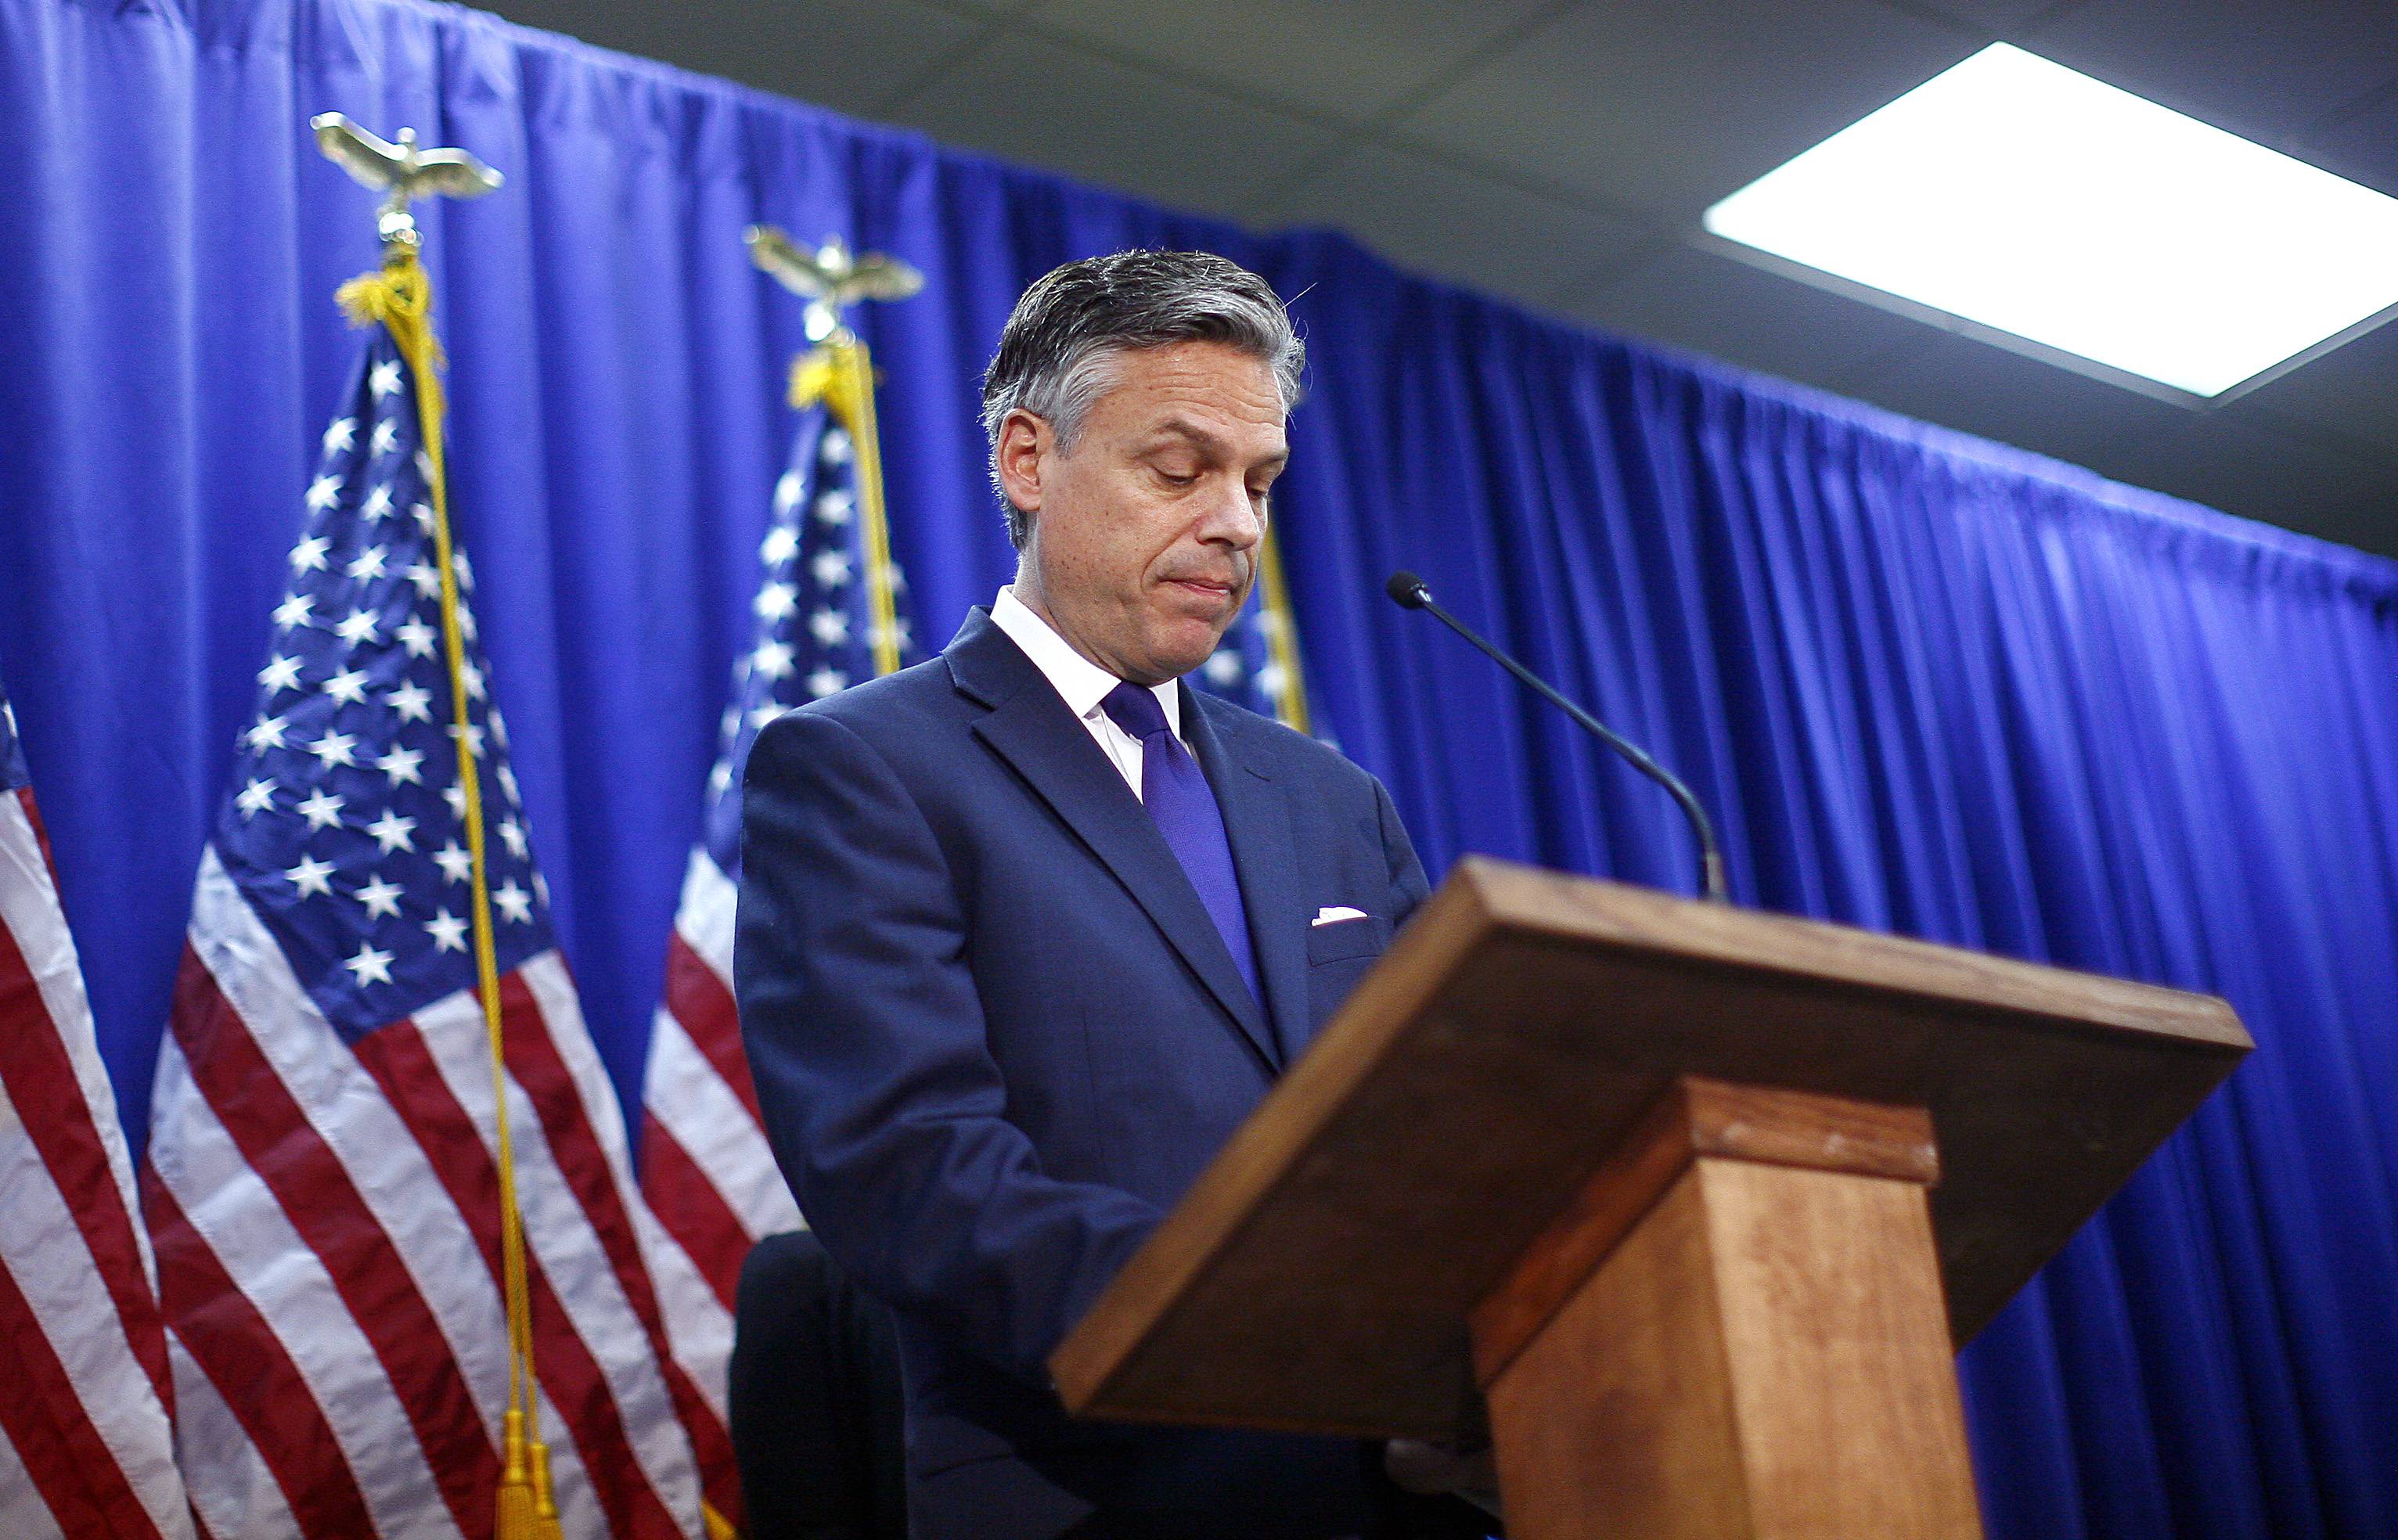 Jon Huntsman - On the same day that Jon Huntsman received an endorsement from The State, South Carolina’s largest newspaper, the former Utah governor and ambassador to China dropped out of the GOP presidential nominating race and threw his support behind Mitt Romney. &quot;I believe it is now time for our party to unite around the candidate best equipped to defeat Barack Obama,&quot; Huntsman said at a news conference. &quot;Despite our differences and the space between us on some of the issues, I believe that candidate is Gov. Mitt Romney.&quot;(Photo: REUTERS/Eric Thayer)